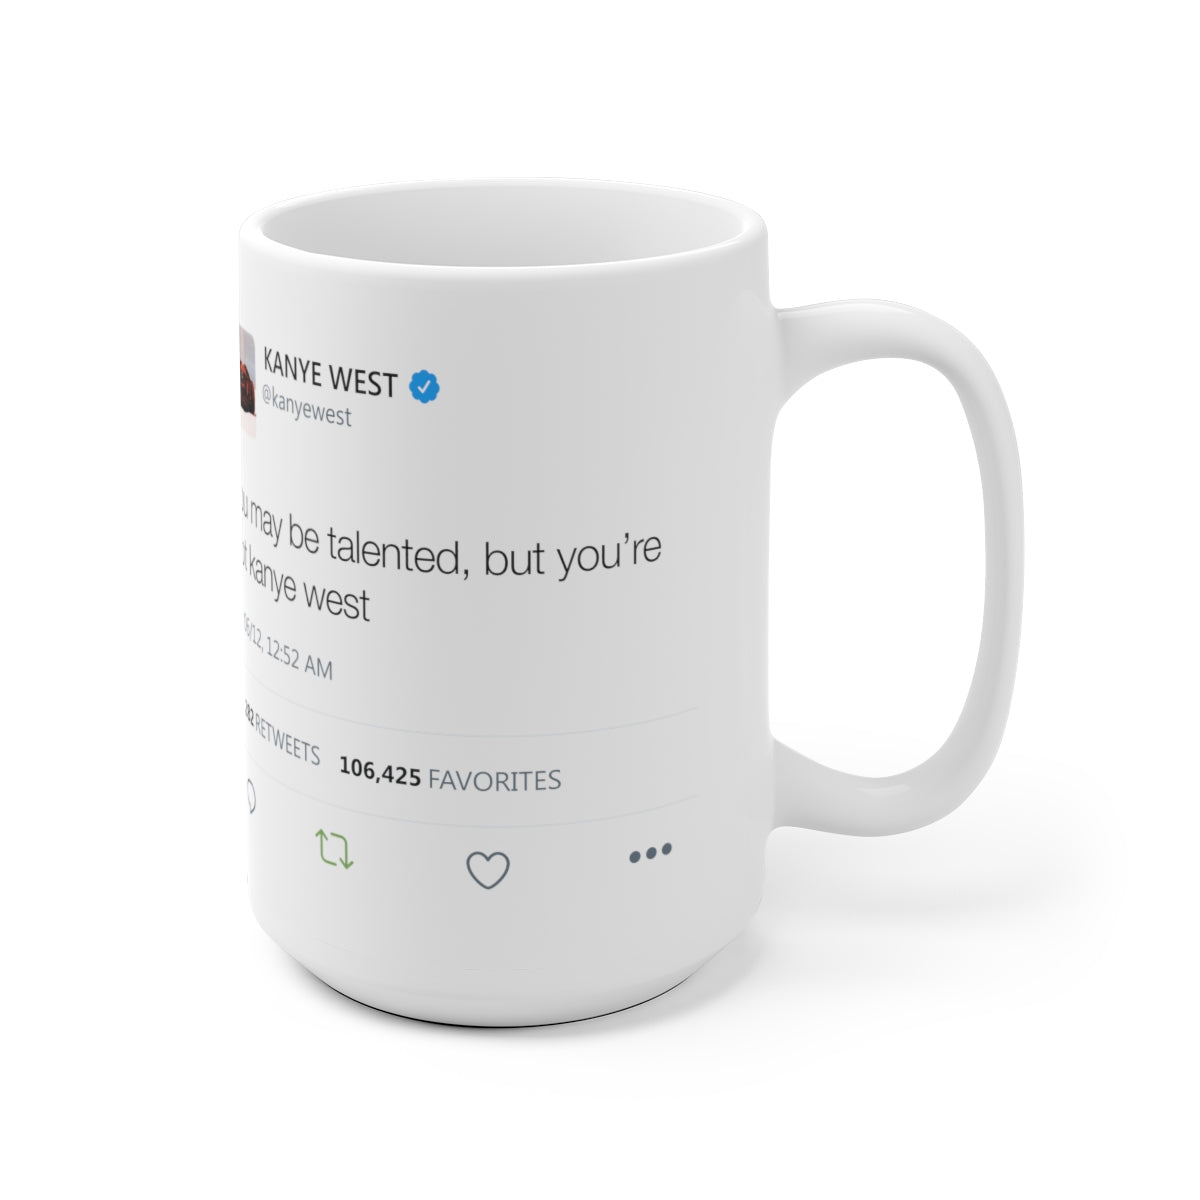 You may be talented, but you are not Kanye West Tweet Mug-Archethype